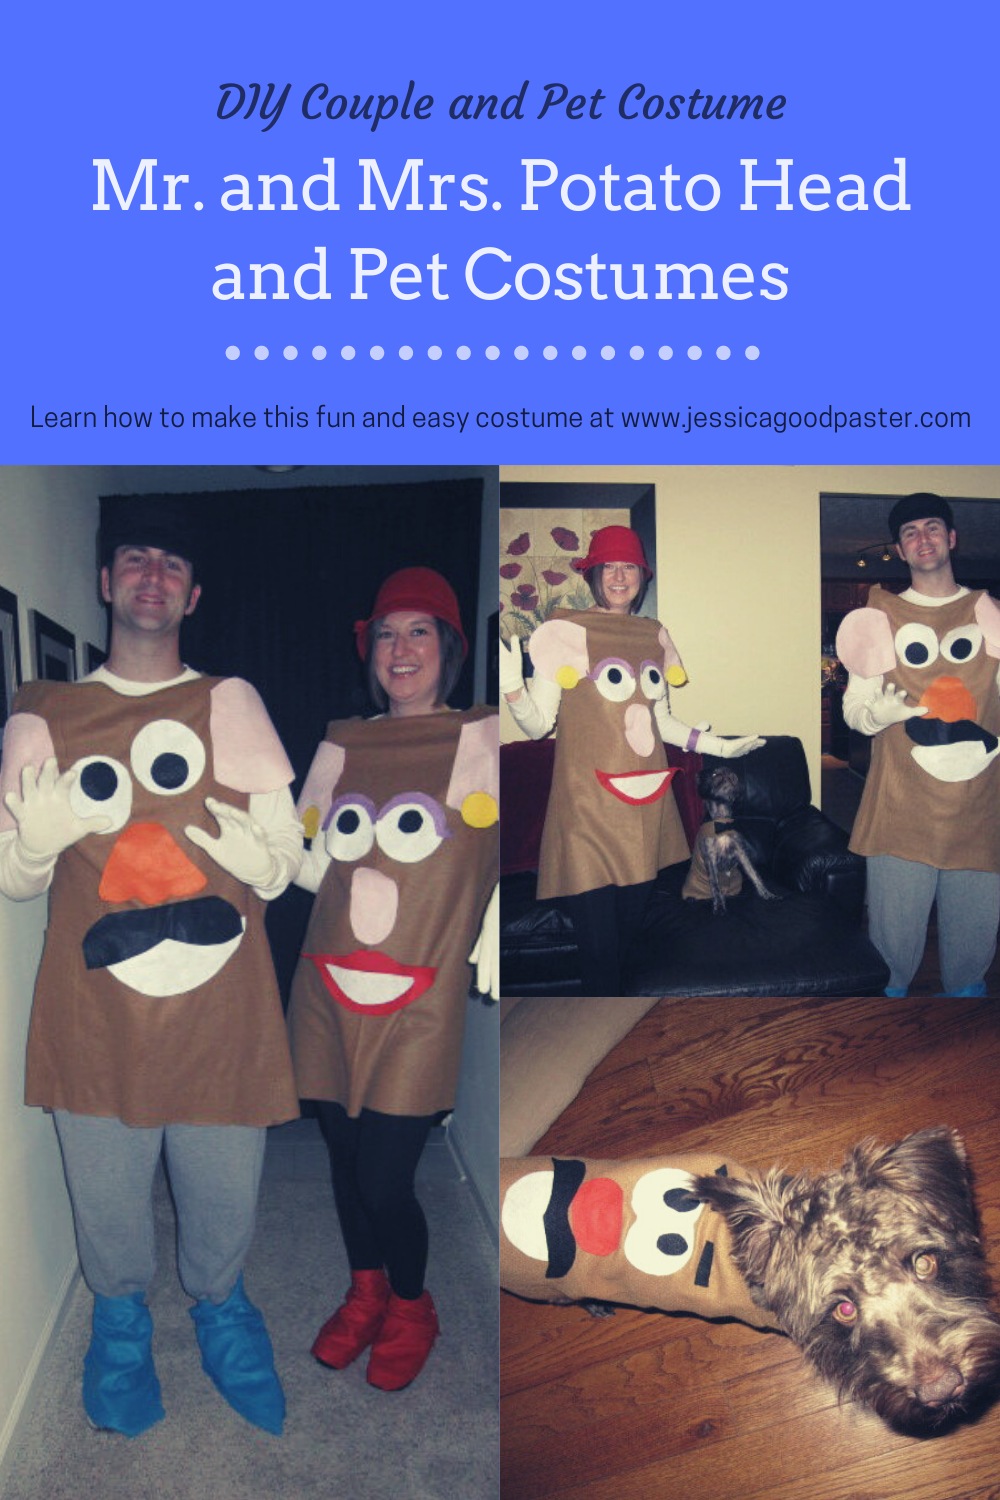 DIY Mr. And Mrs. Potato Head with Pet and 13 Unique Halloween Costume Ideas for You, Your Family, or Group! Find the perfect costume for individuals, couples, families, groups, and kids. Includes some of the best DIY costume ideas as well. #halloween #costumes #halloweencostumes #couplecostumes #groupcostume #diycostumes #familycostume #trunkortreat